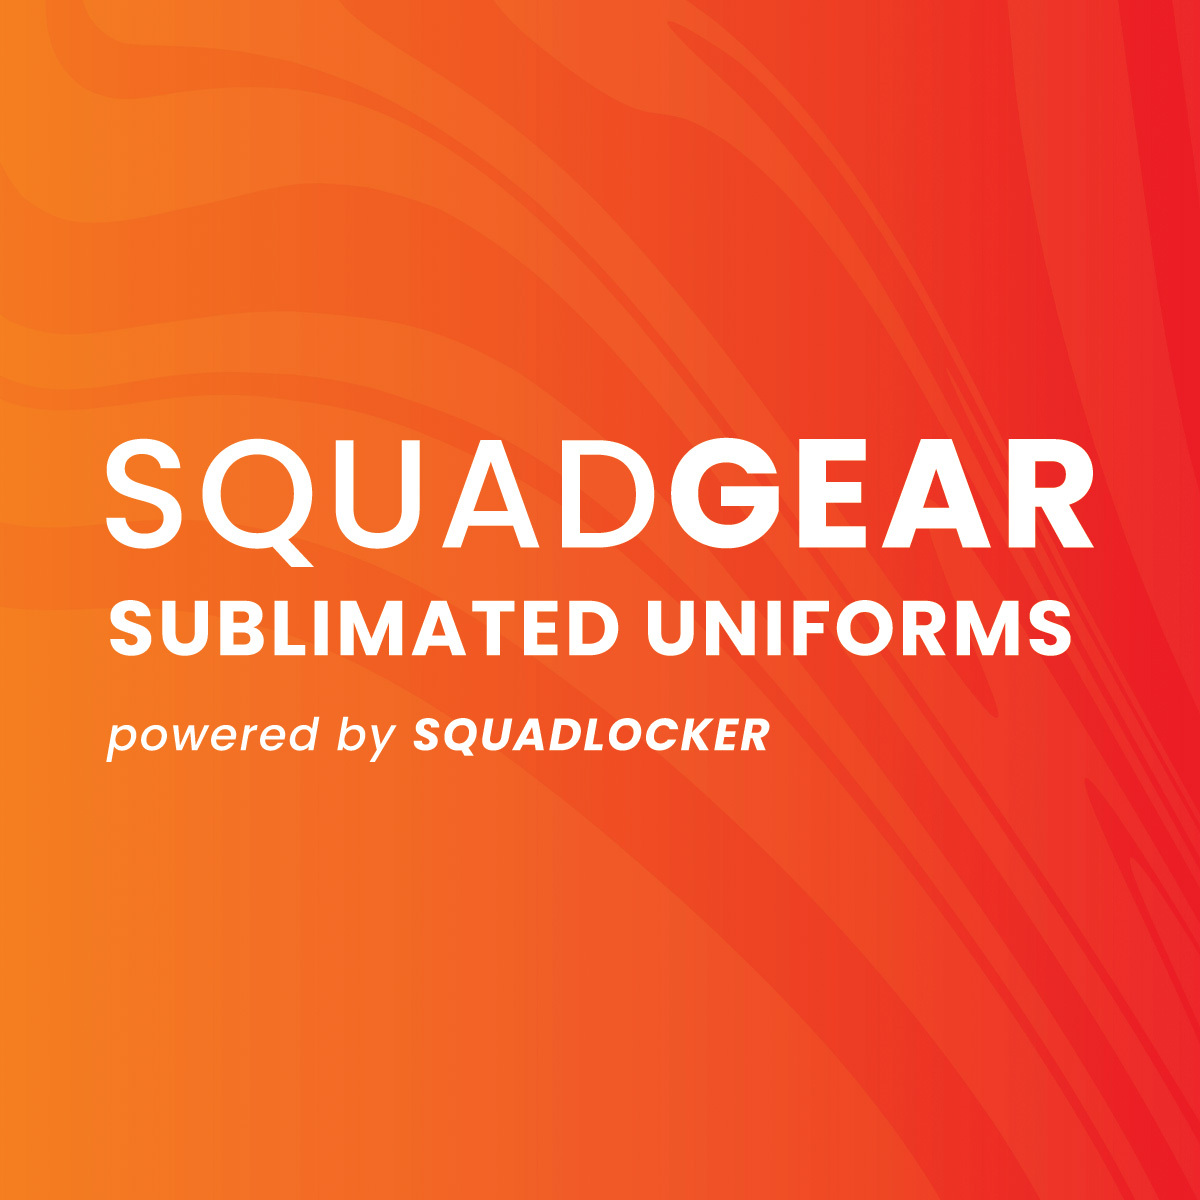 SquadLocker Celebrates Uniform Day with SquadGEAR™ Sublimated Uniforms that Ship in 3-5 Days